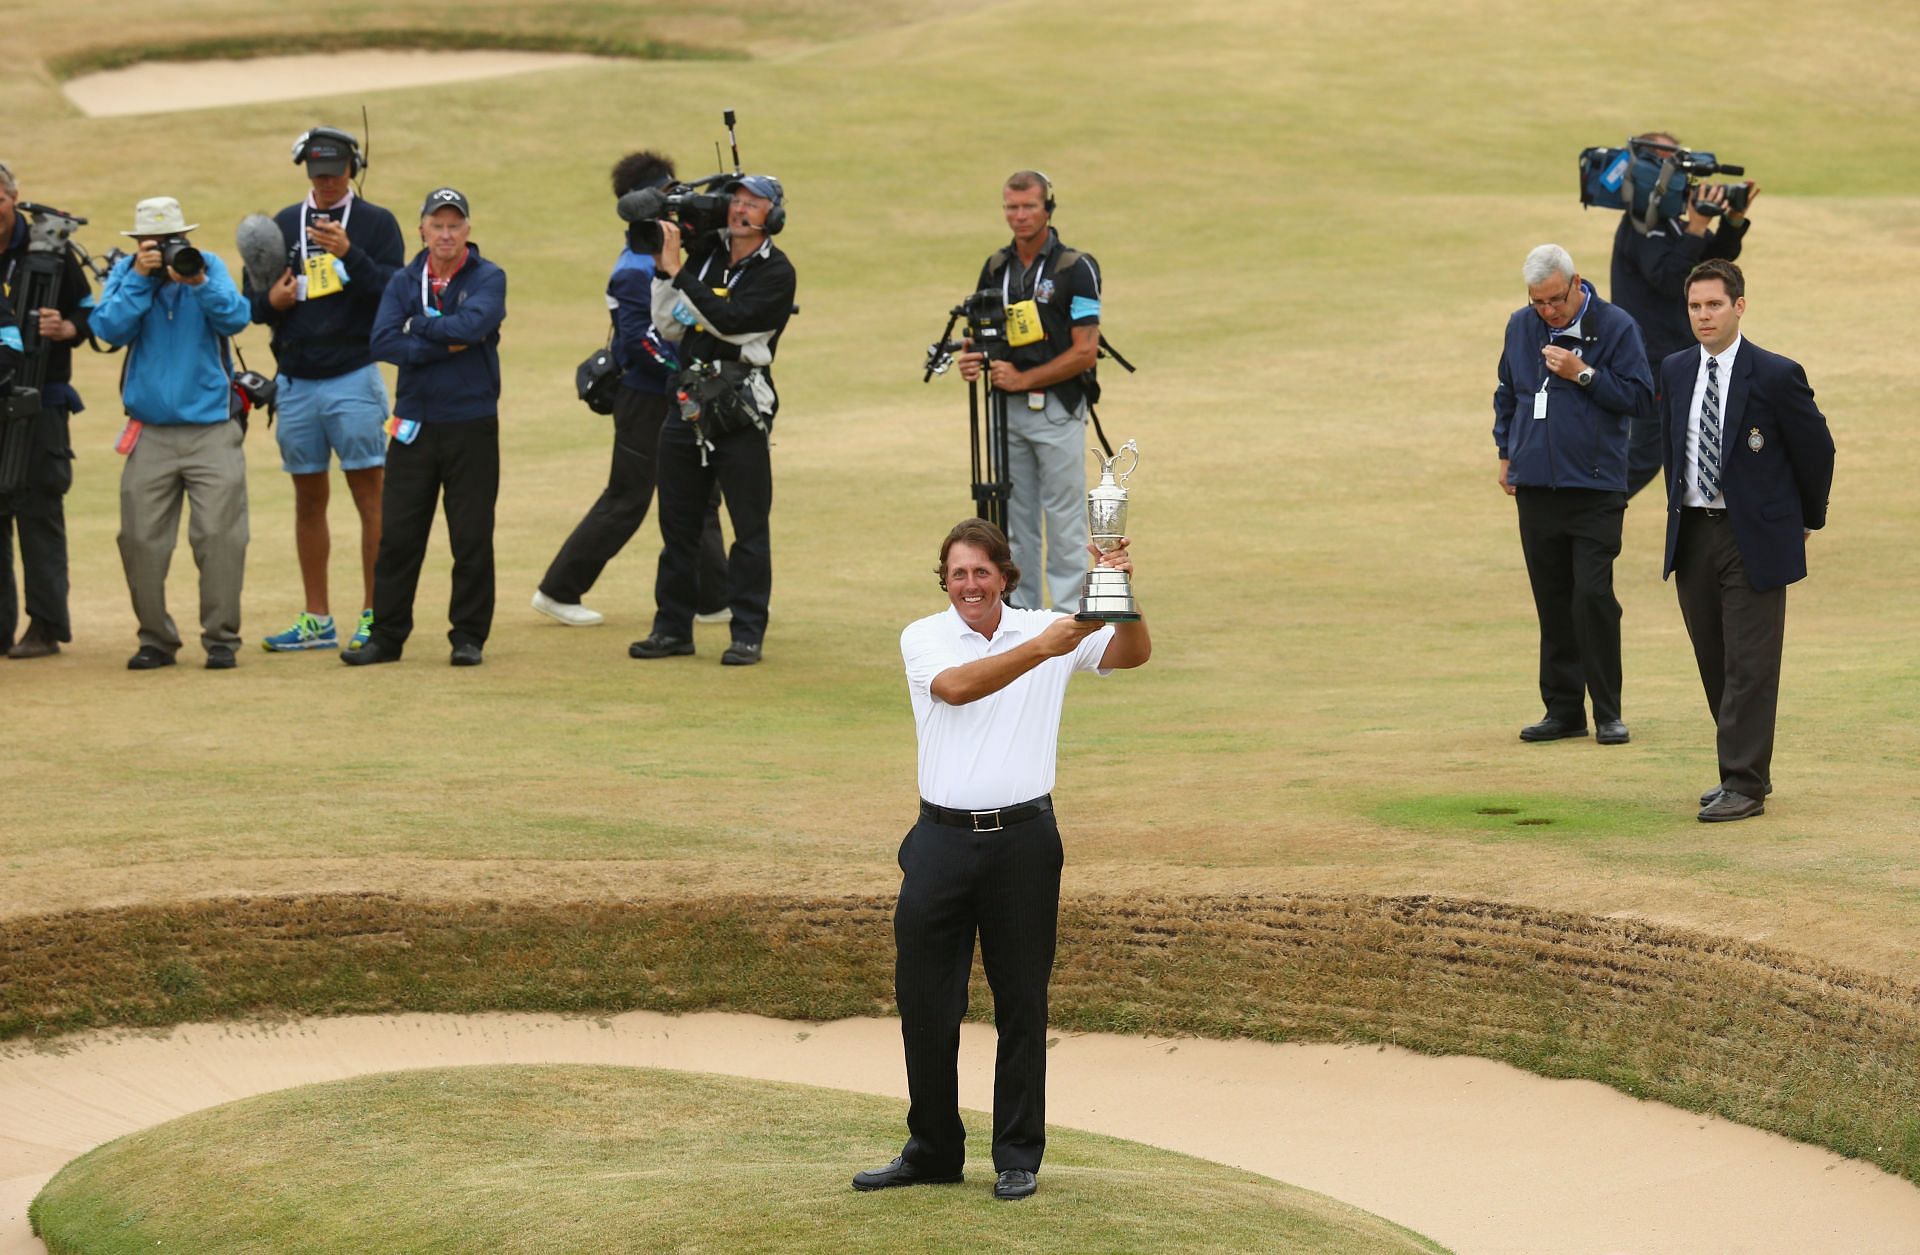 Phil Mickelson with The Open 2013 Trophy (via Getty Images)